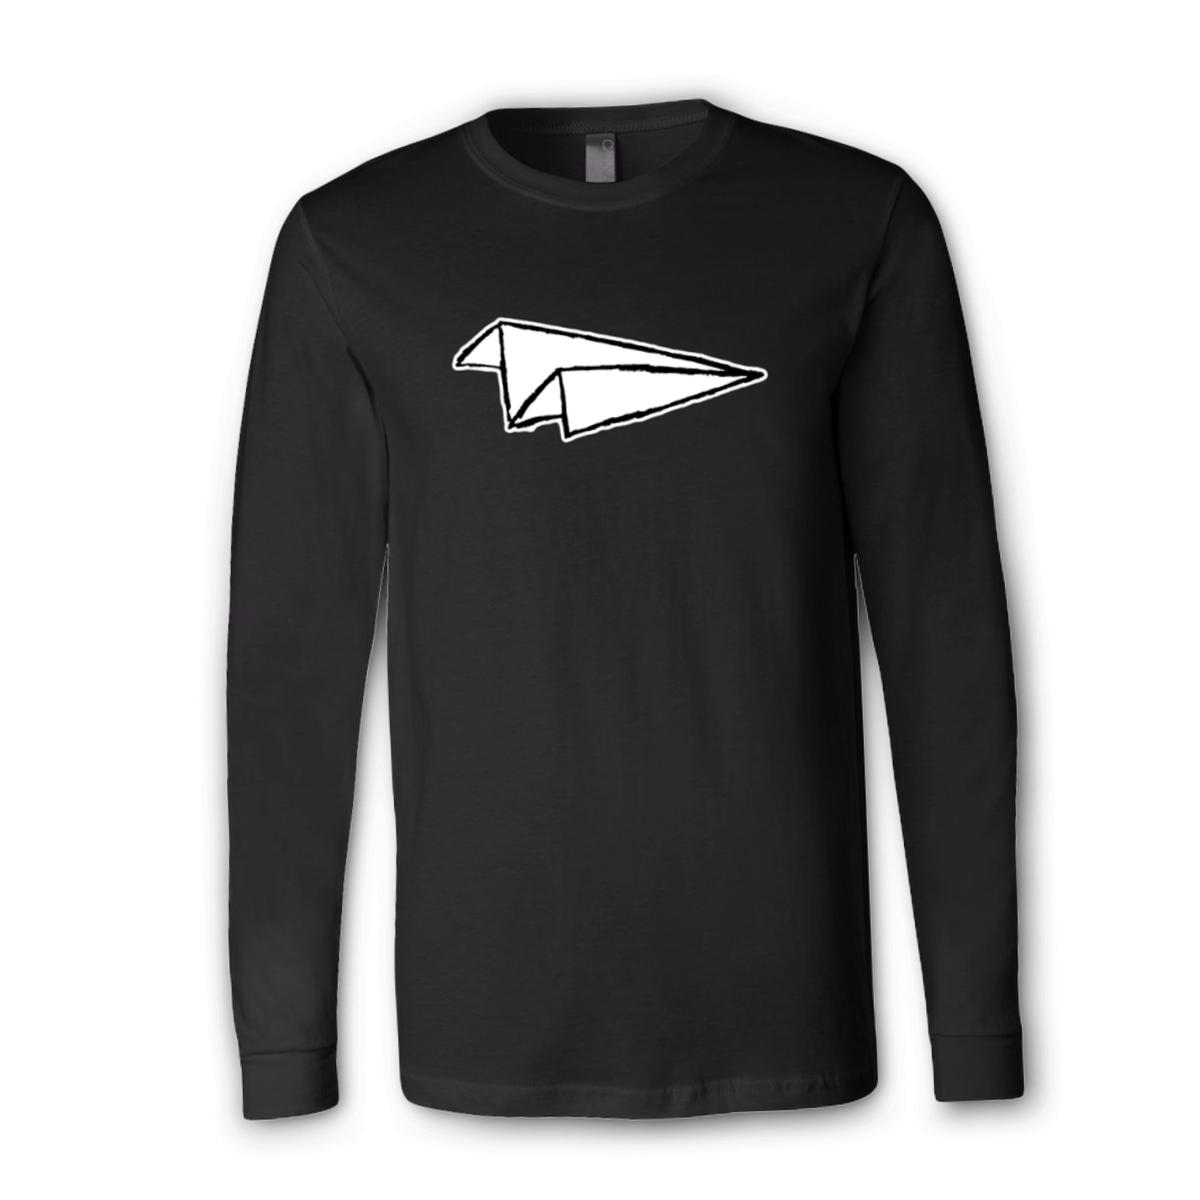 Airplane Sketch Unisex Long Sleeve Tee Double Extra Large black